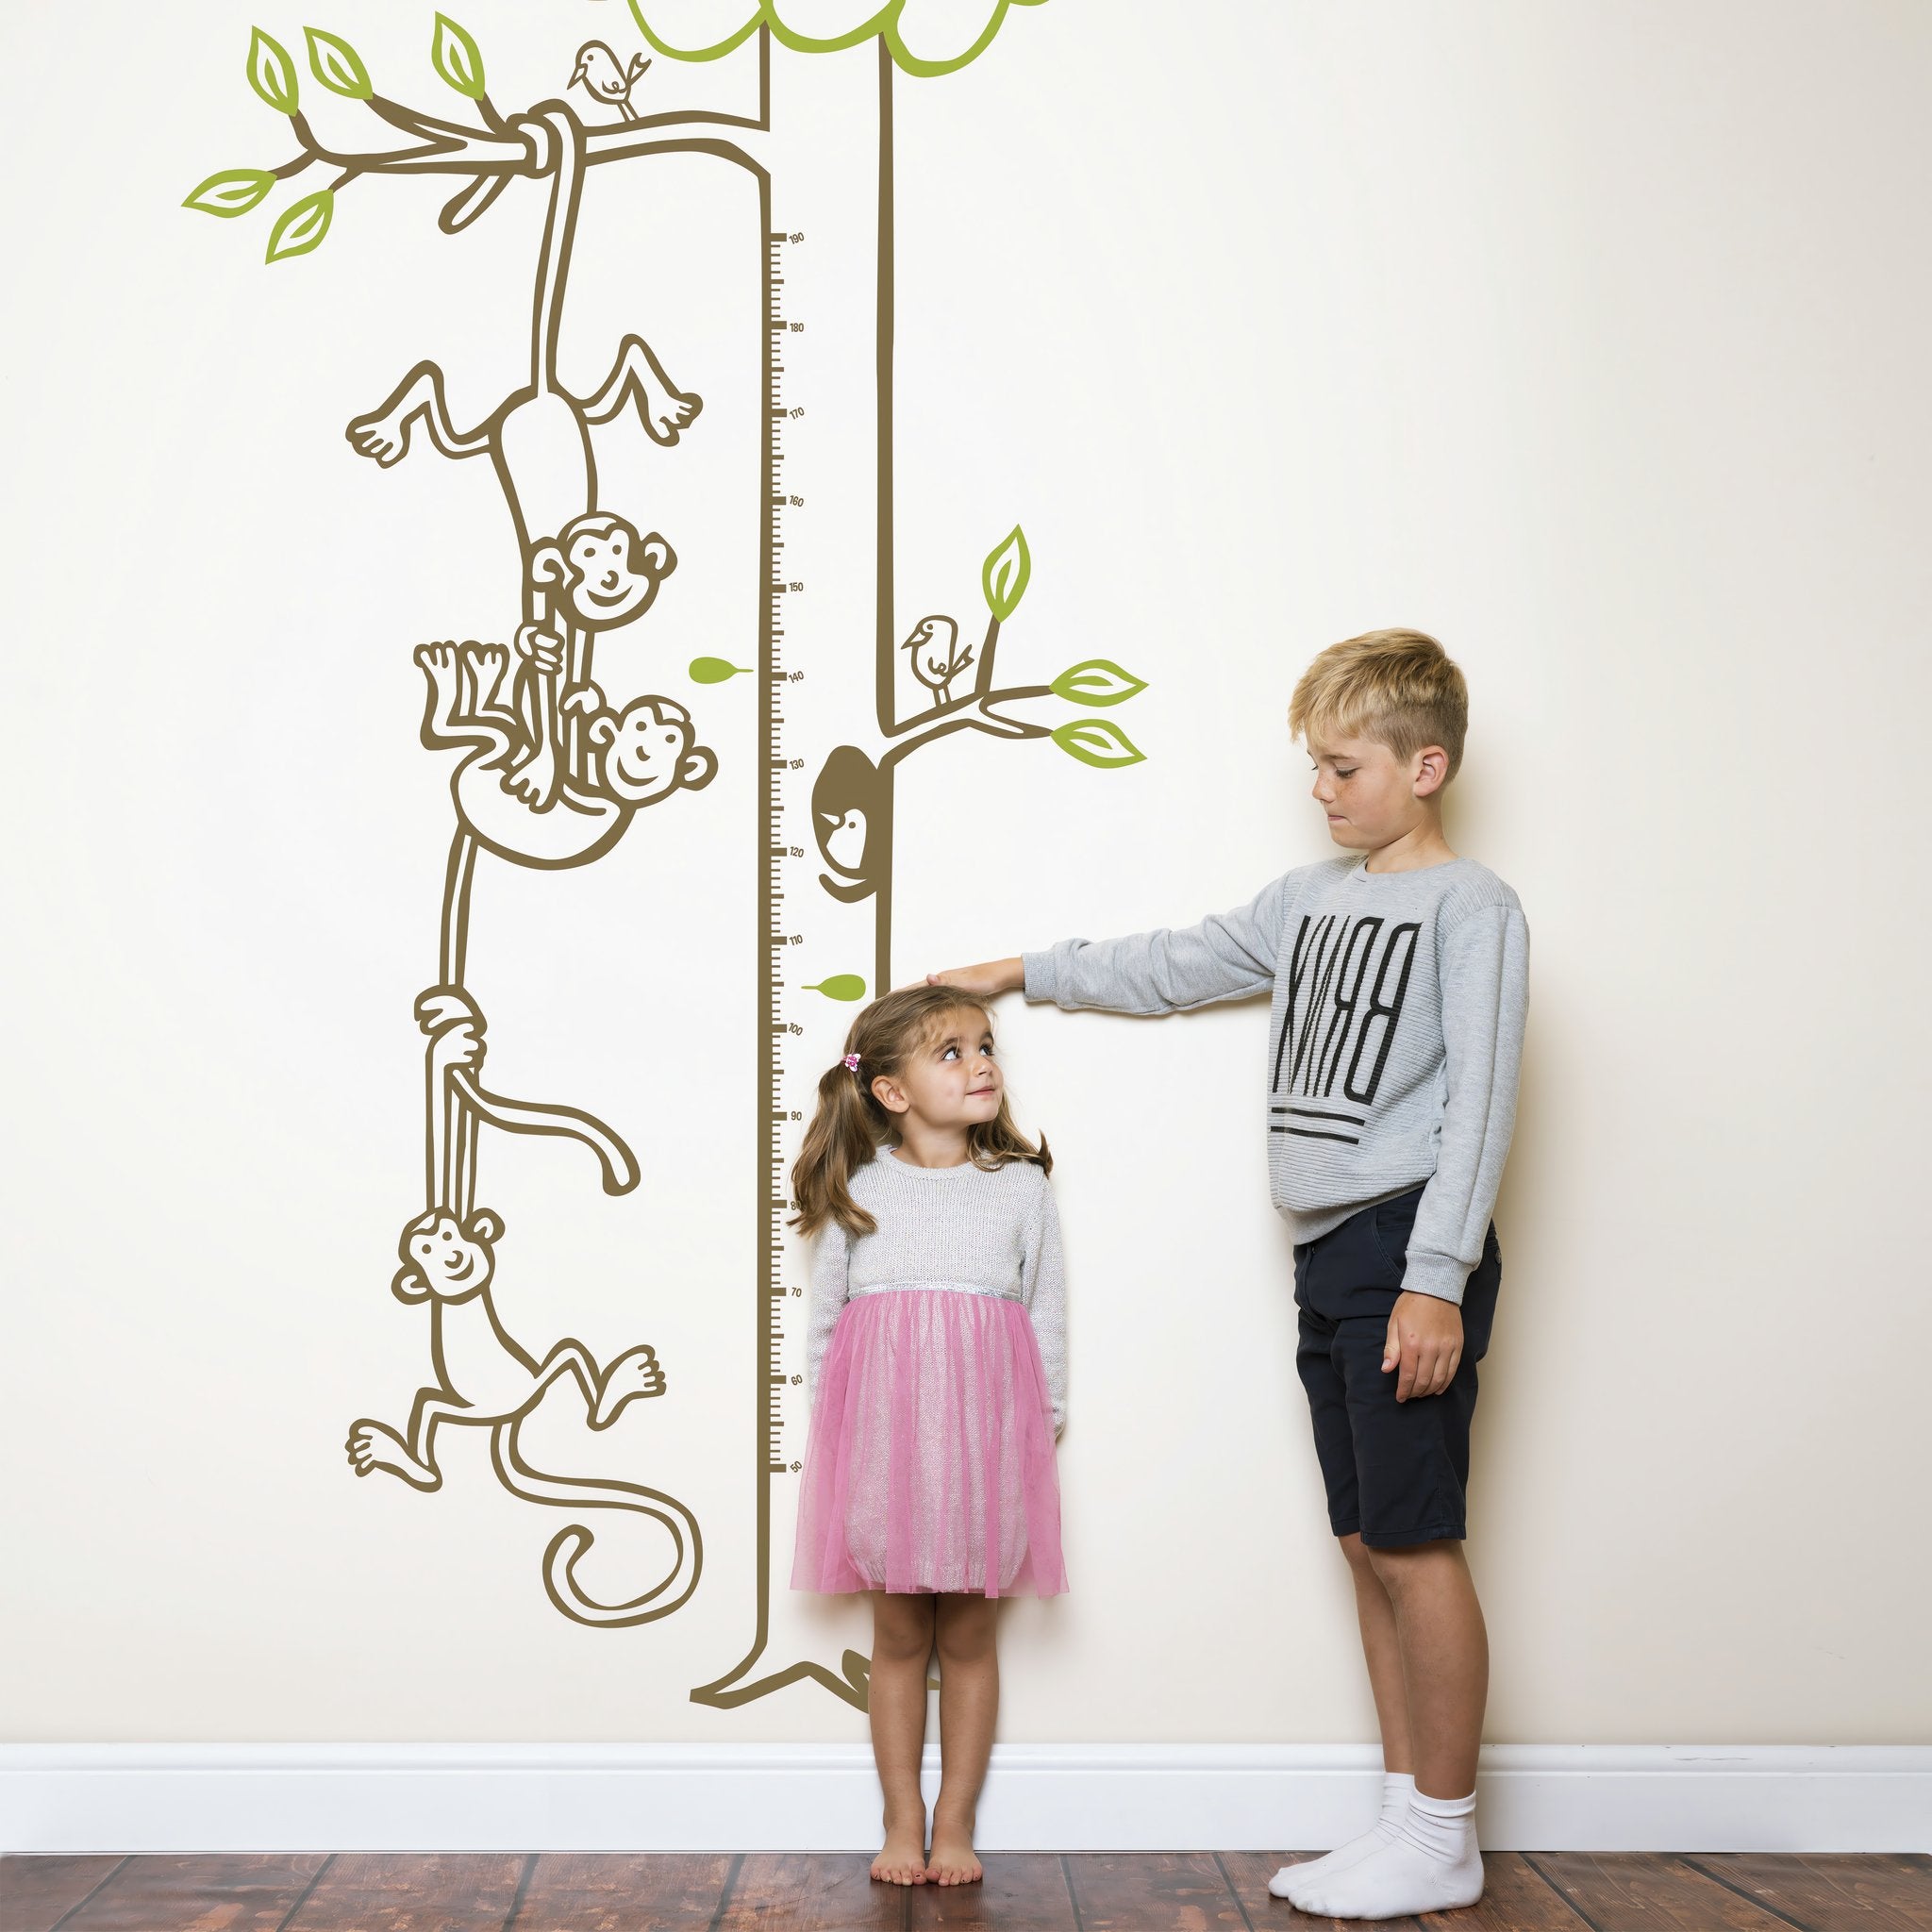 Height chart wall sticker with monkeys hanging from a tree to form a chain with a young boy and girl nearby.